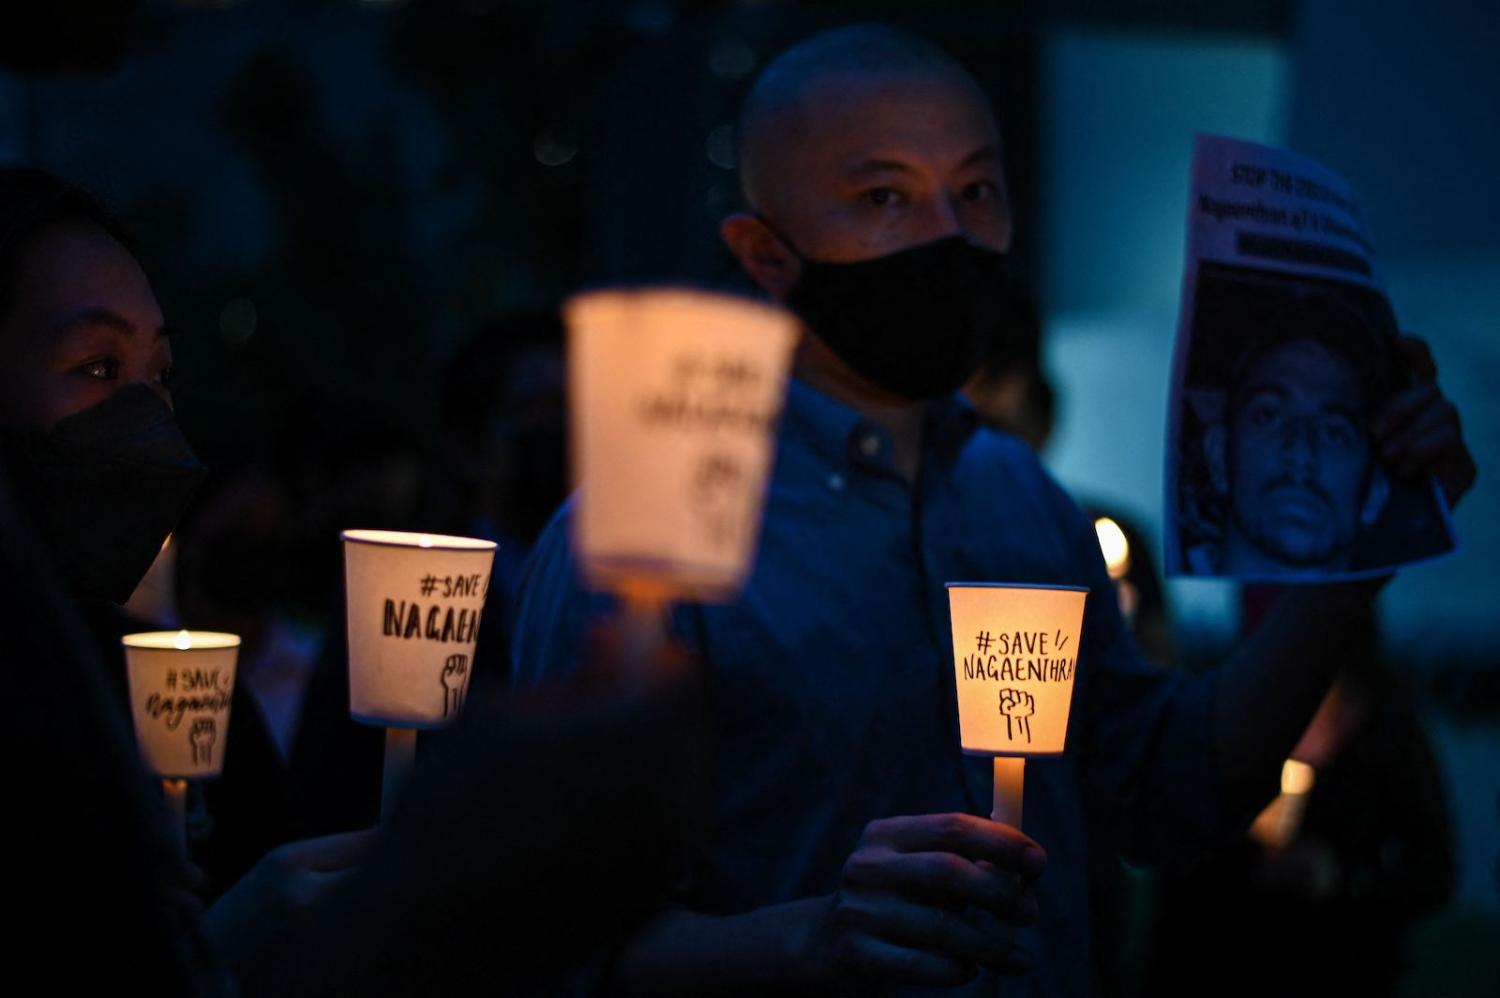 A candlelight vigil to protest the execution of Nagaenthran K. Dharmalingam in Singapore (Mohd Rasfan/AFP via Getty Images)